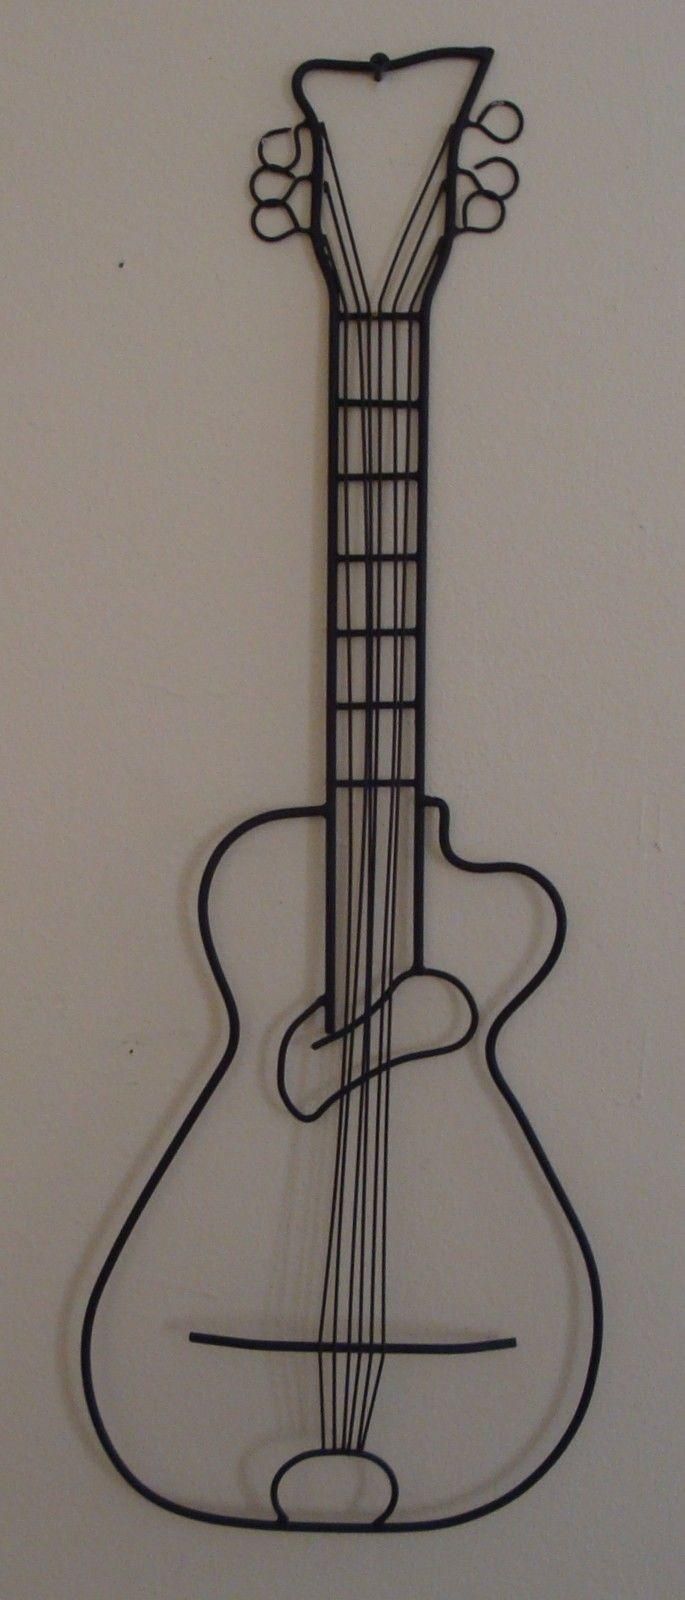 Lot Of Mid Century 1960's Metal Musical Instrument Wall Art With Guitar Metal Wall Art (View 4 of 20)